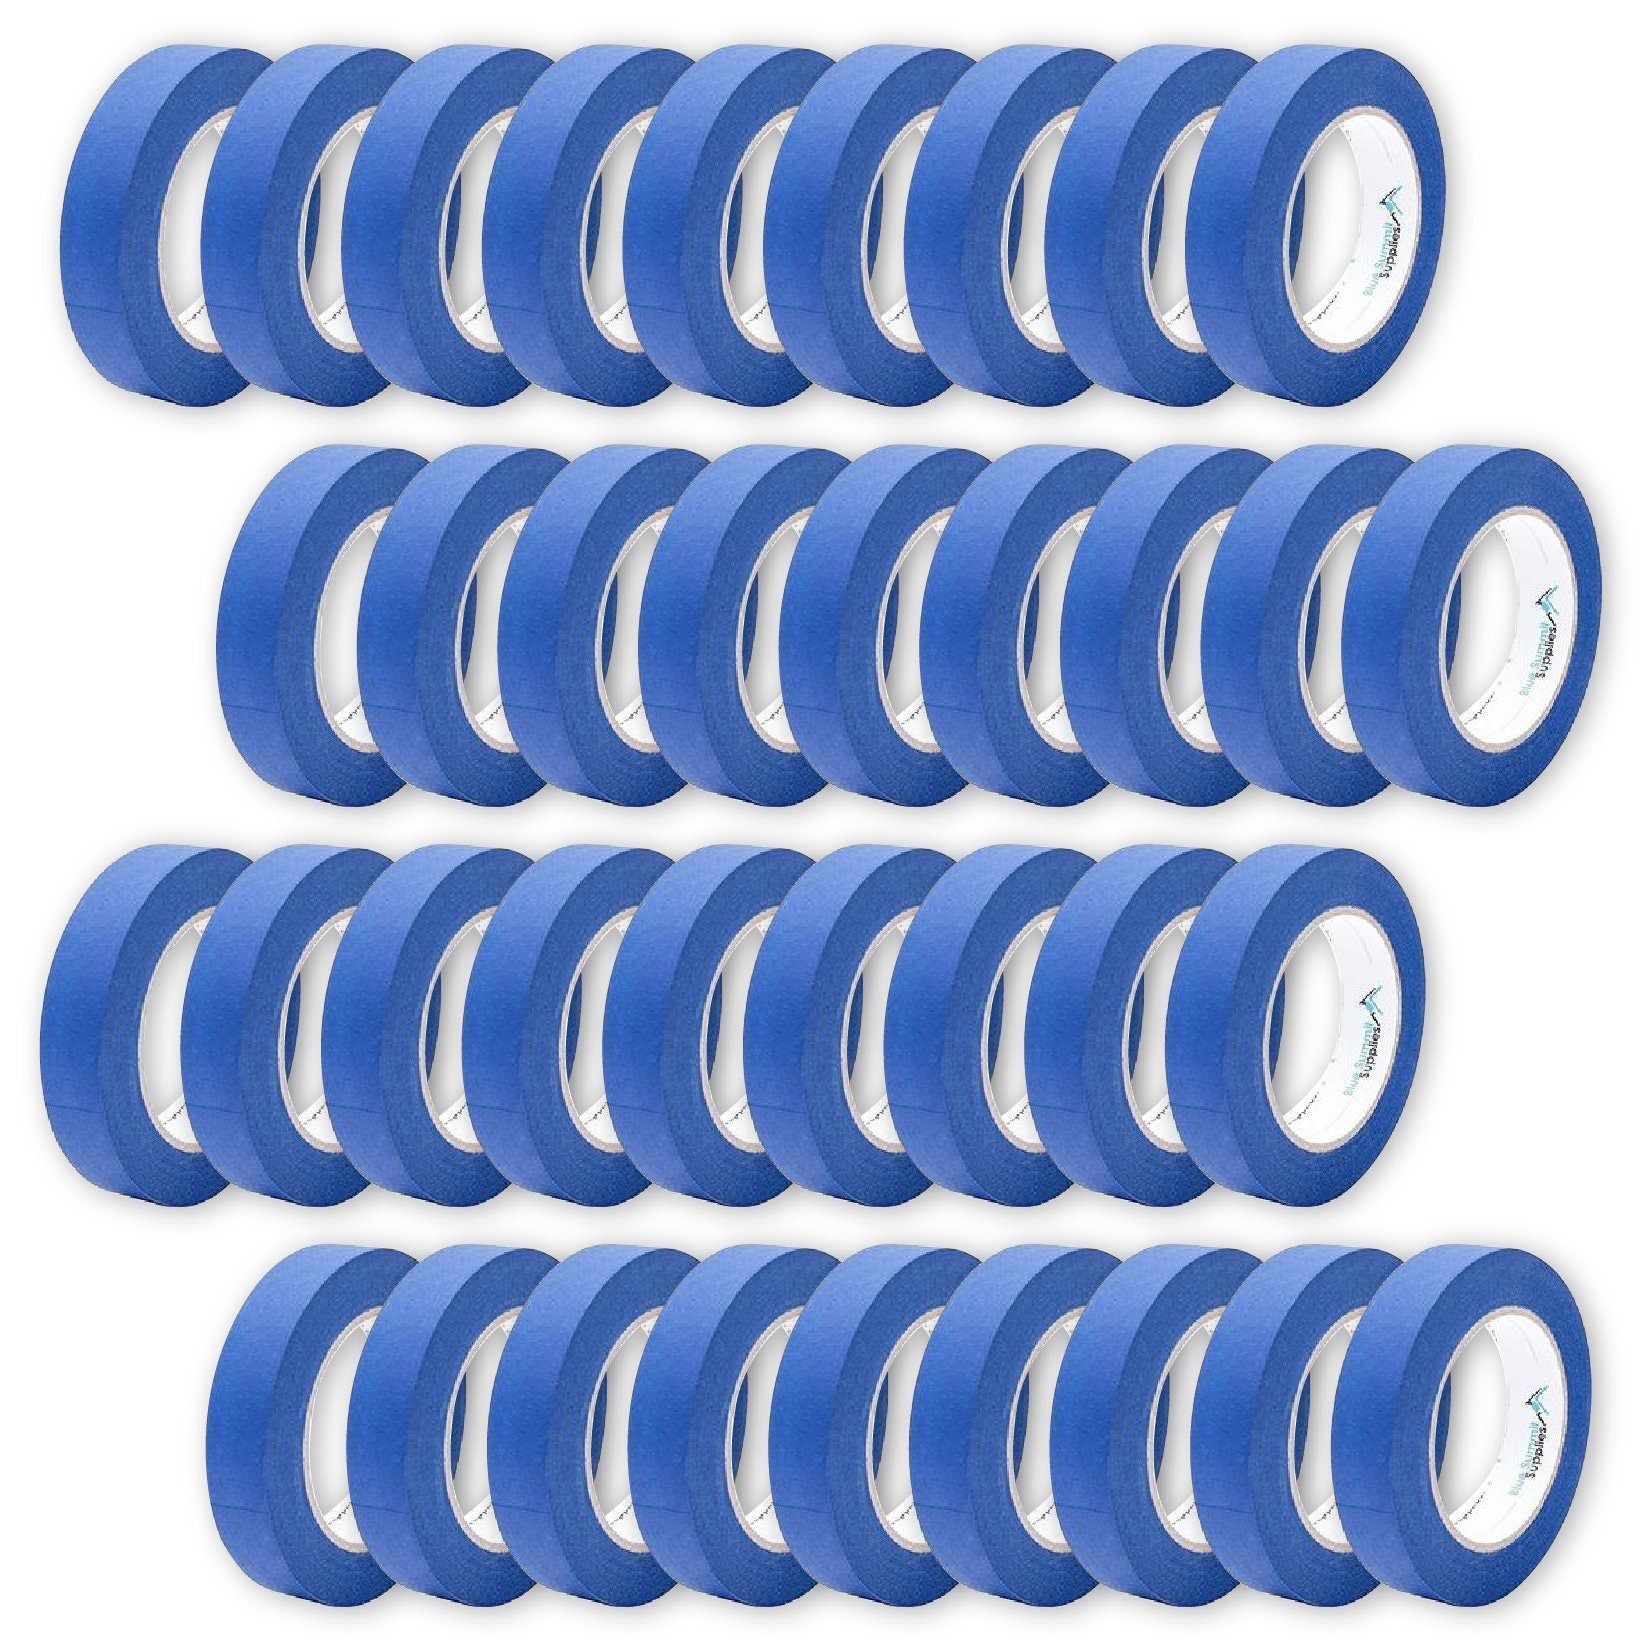 Blue Summit Supplies Heavy-Duty Duct Tape (90'), 6 Pack